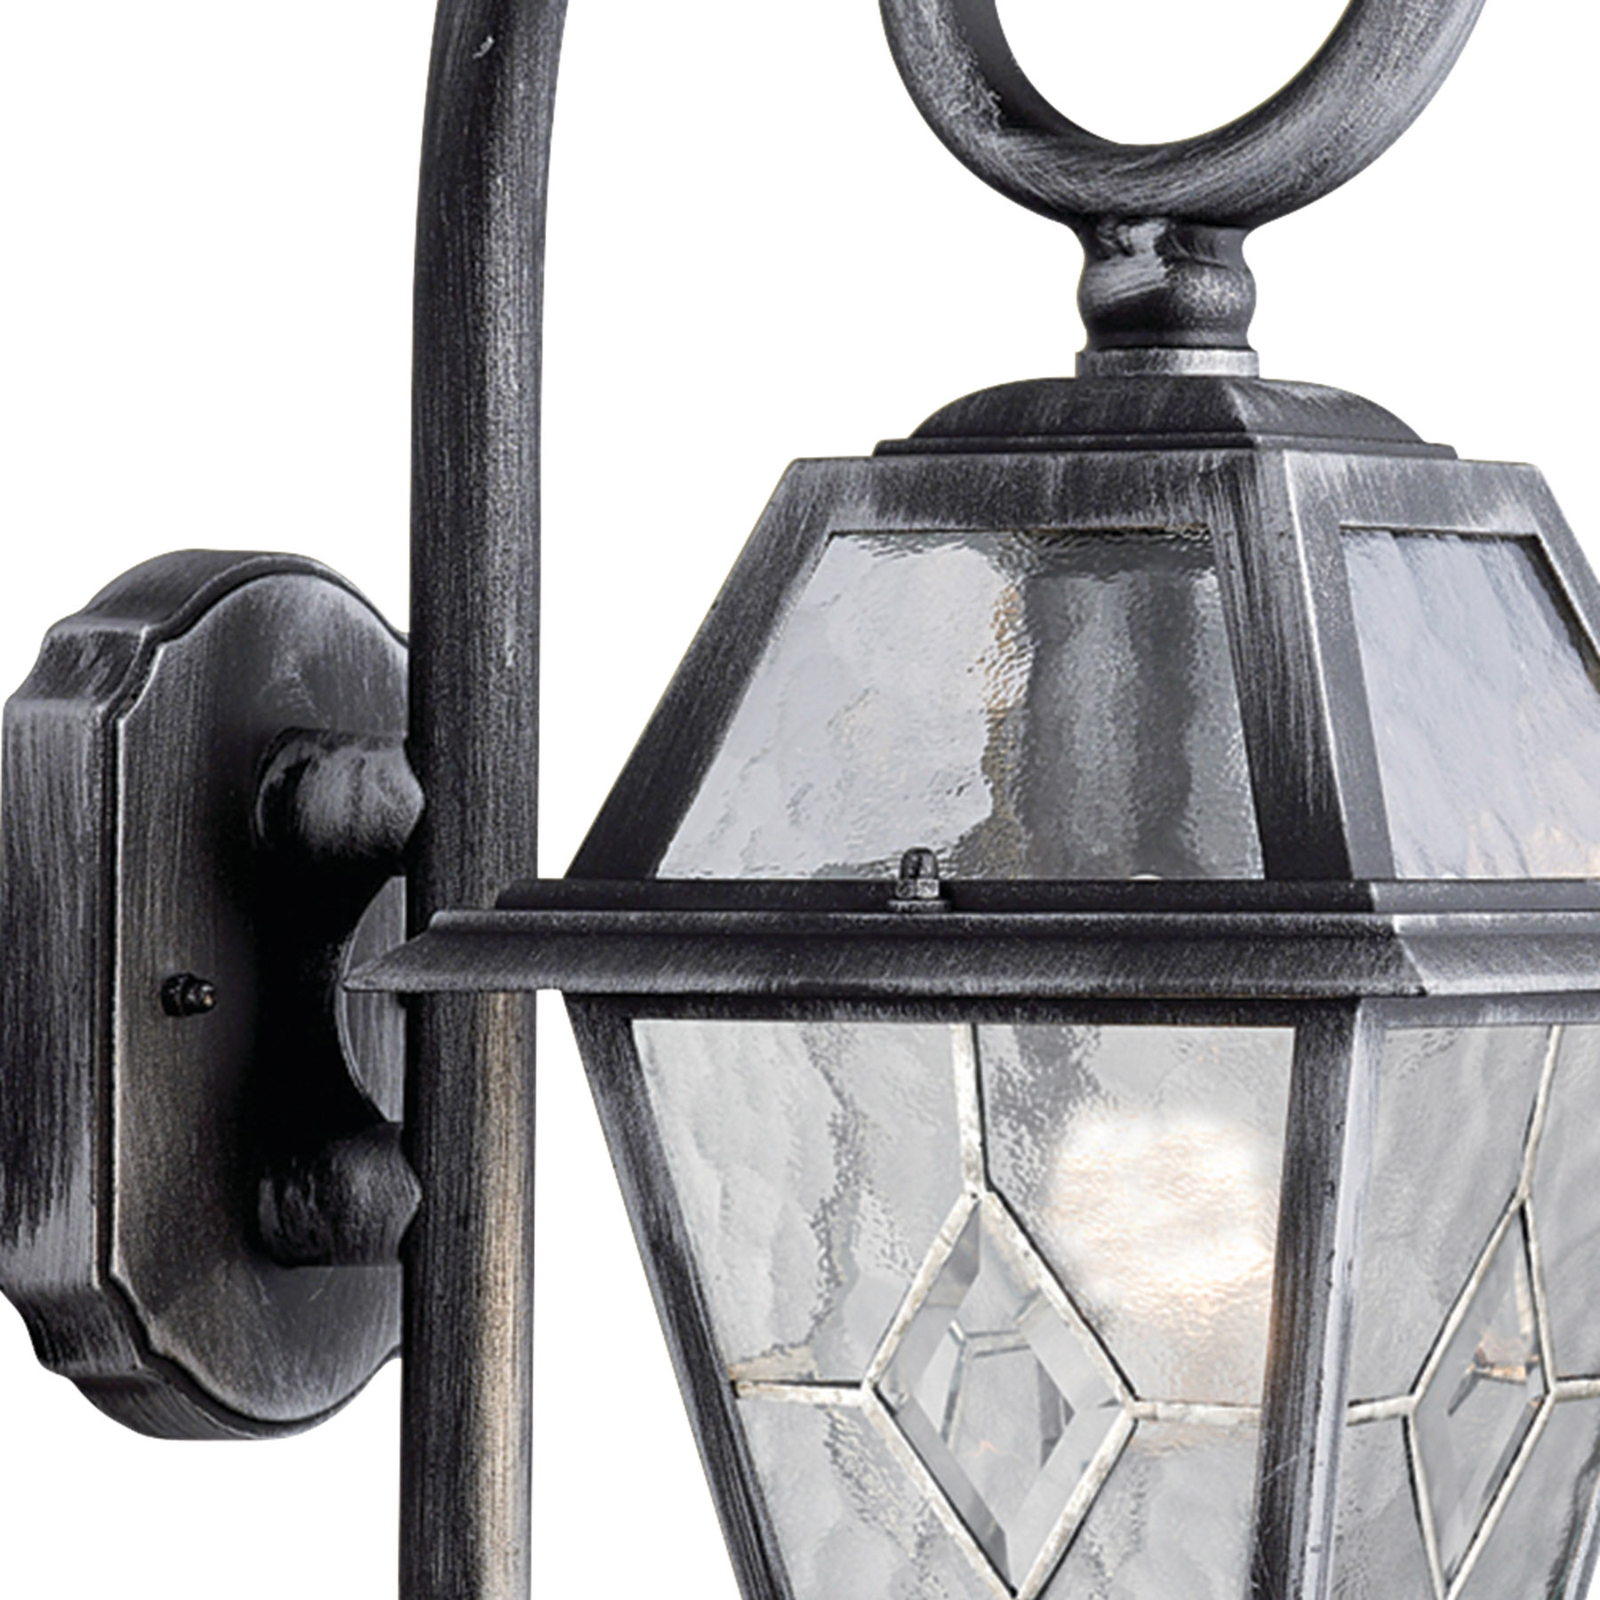 Genoa outdoor wall lamp with lead glass, IP44